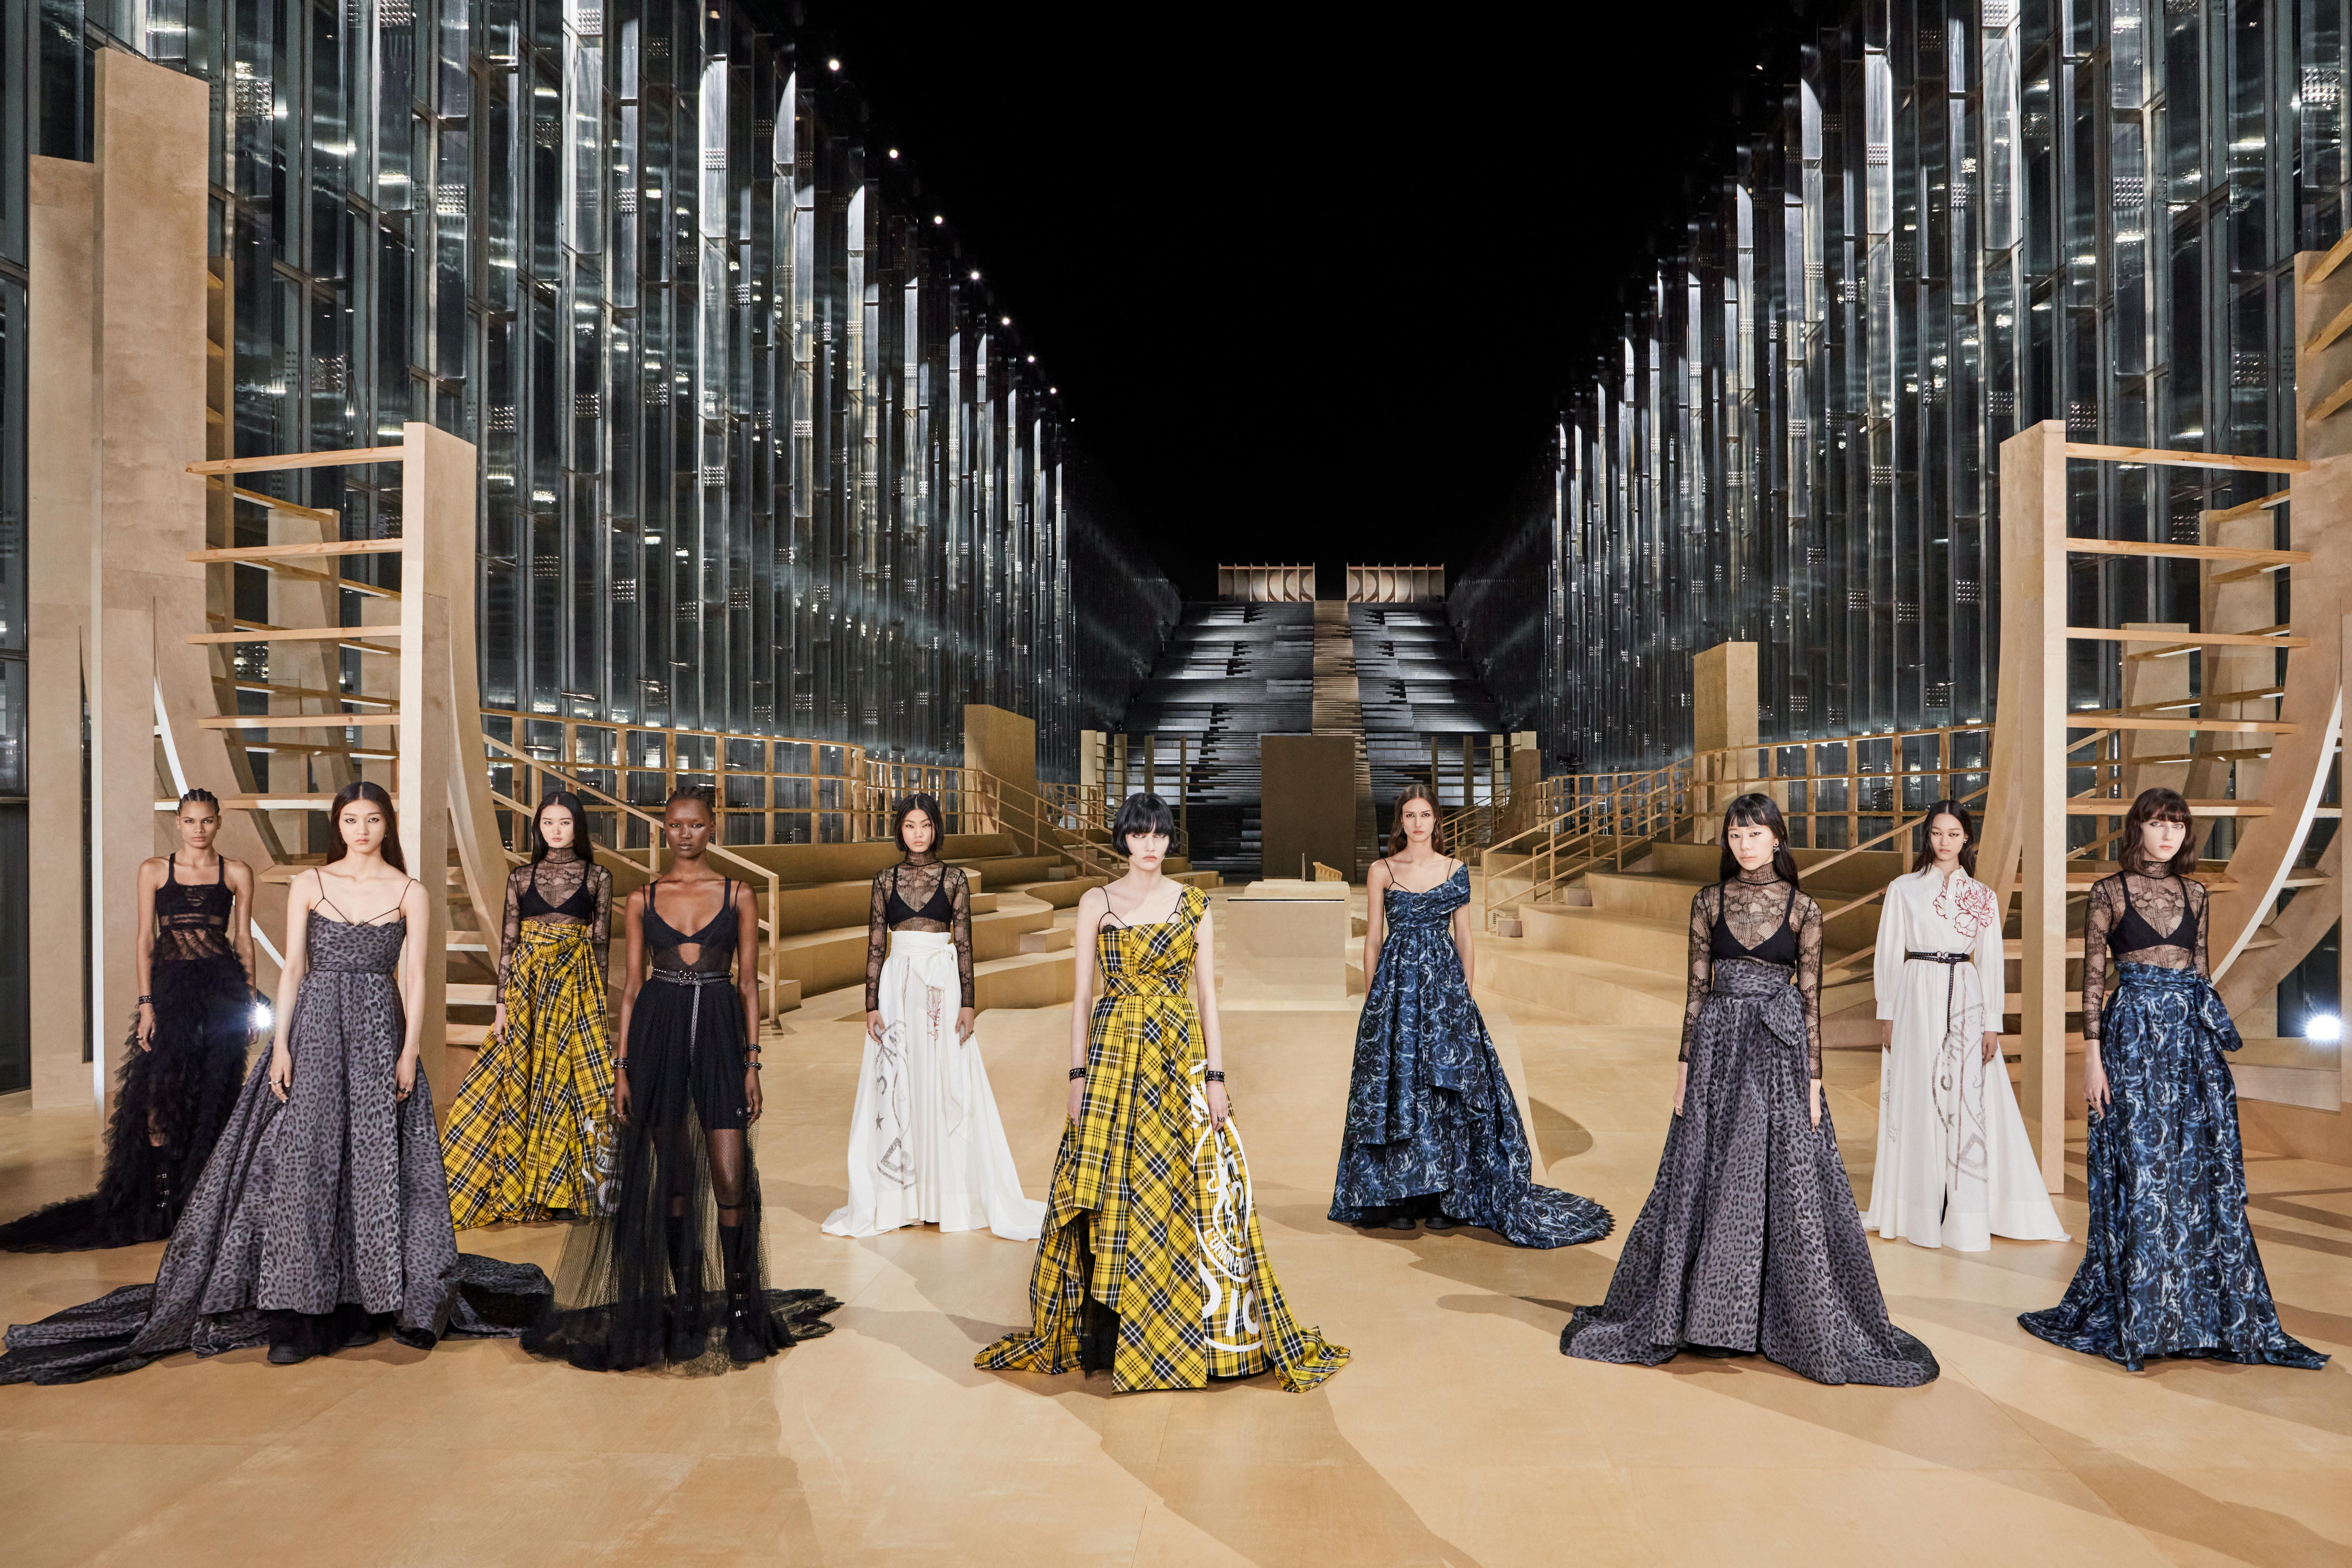 Dior took over the new year with some of our favourite Korean